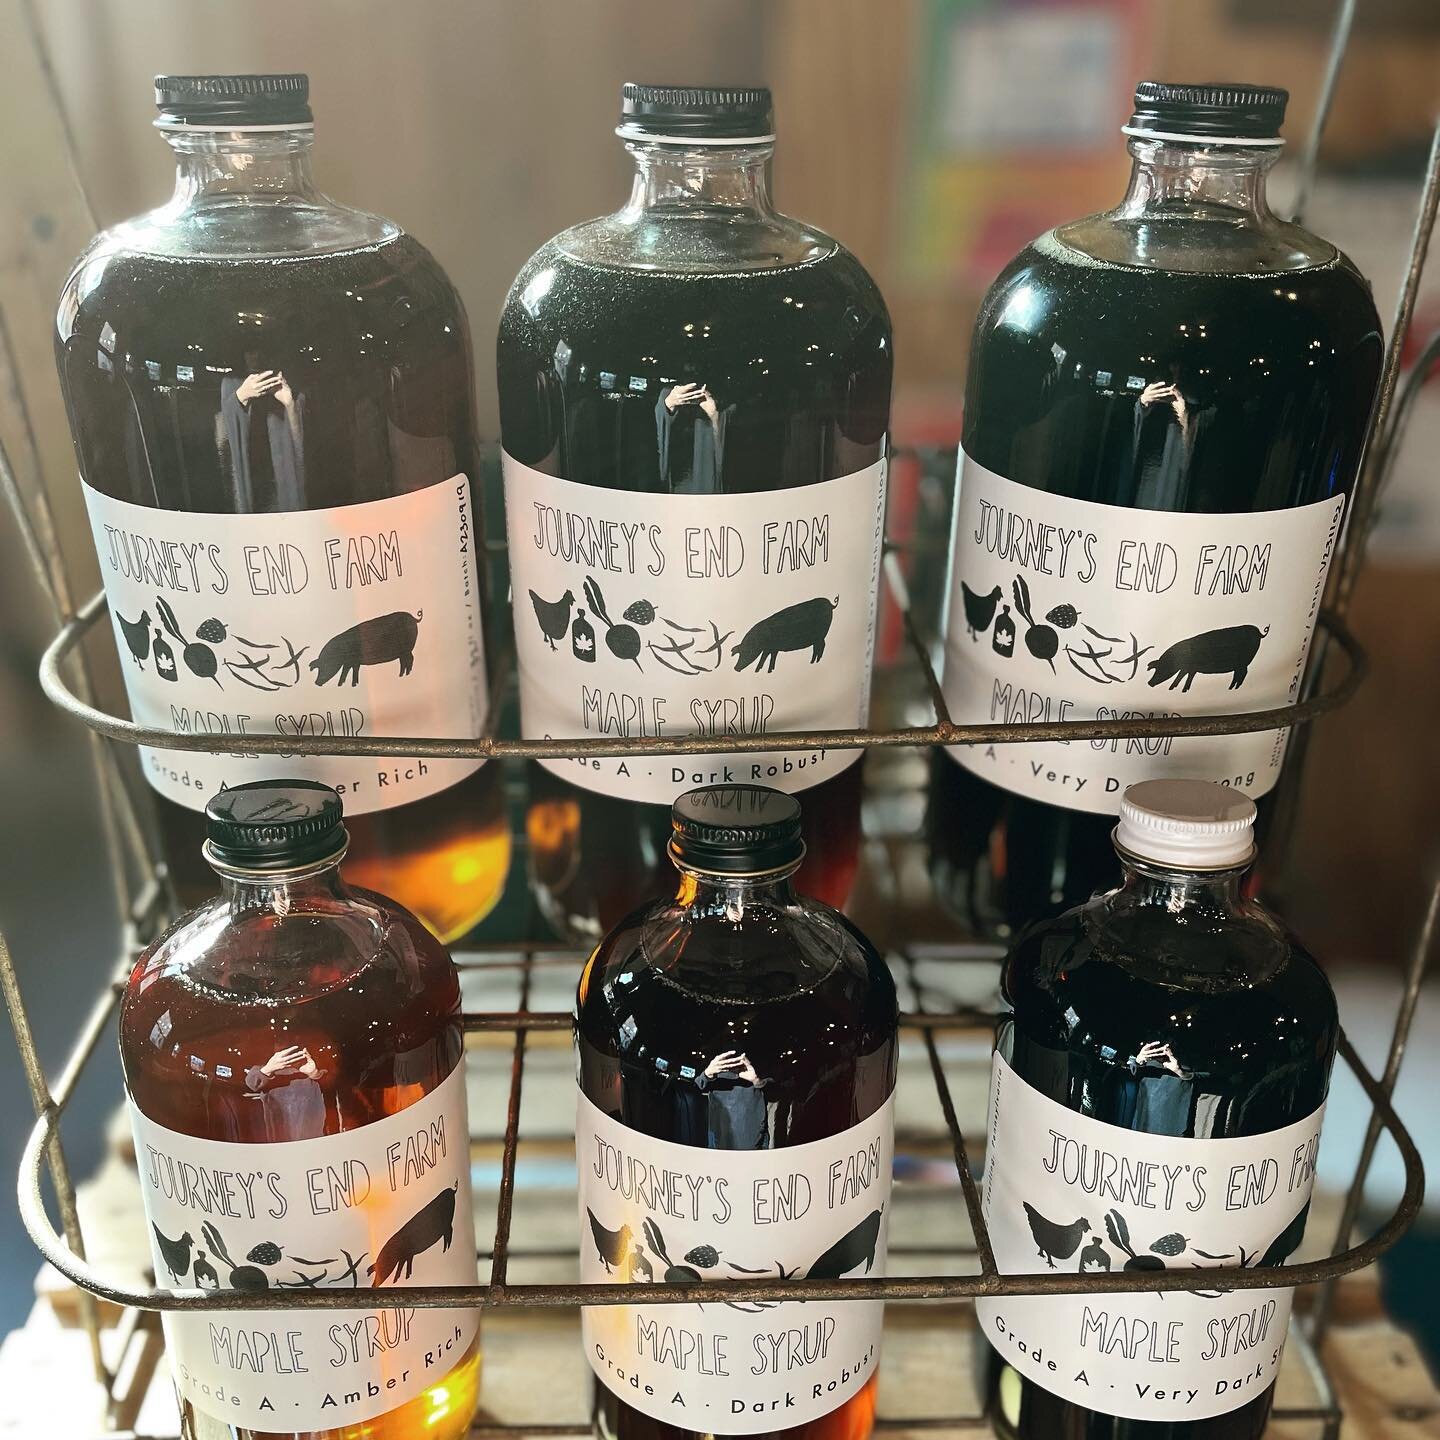 If you need any last minute treats, we&rsquo;ll be at the Main Street Market in Honesdale tomorrow with pretty little bottles scrumptious syrup and jars of maple cream. 11am-1pm at the Cooperage.